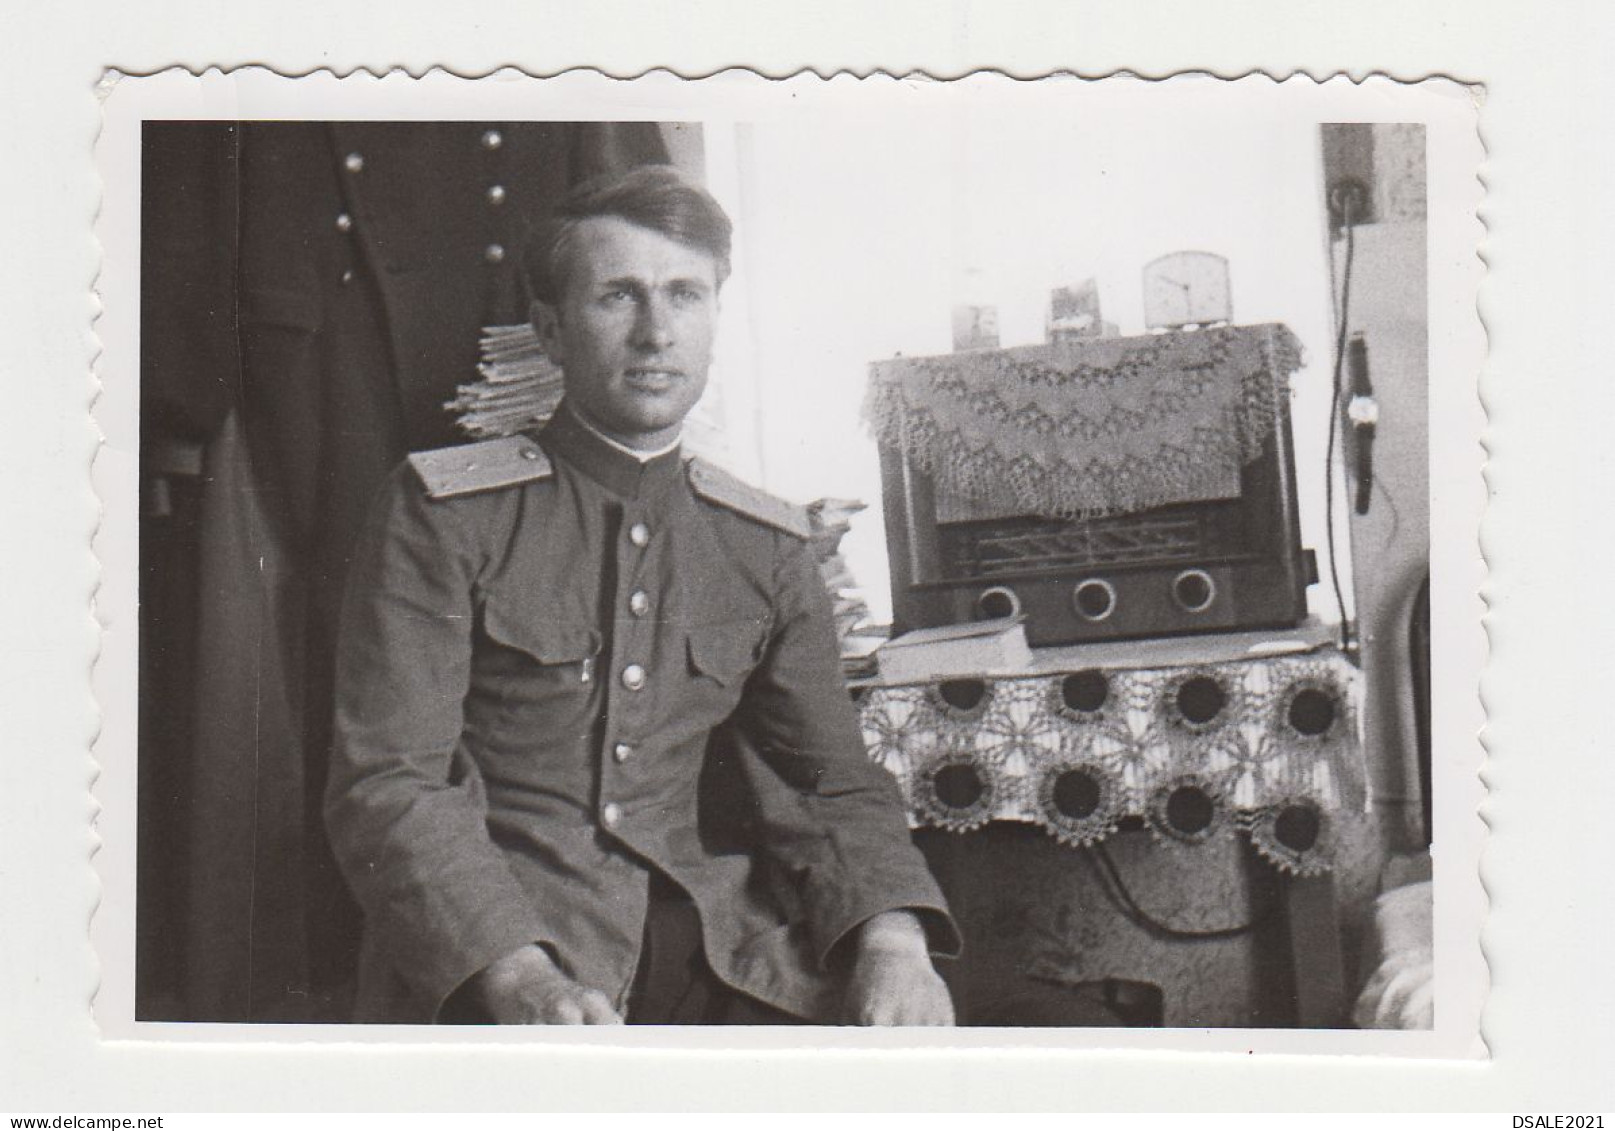 Man Military Officer With Uniform Pose To Old Tube Radio, Portrait, Vintage Orig Photo 8.7x6.1cm. (20042) - War, Military